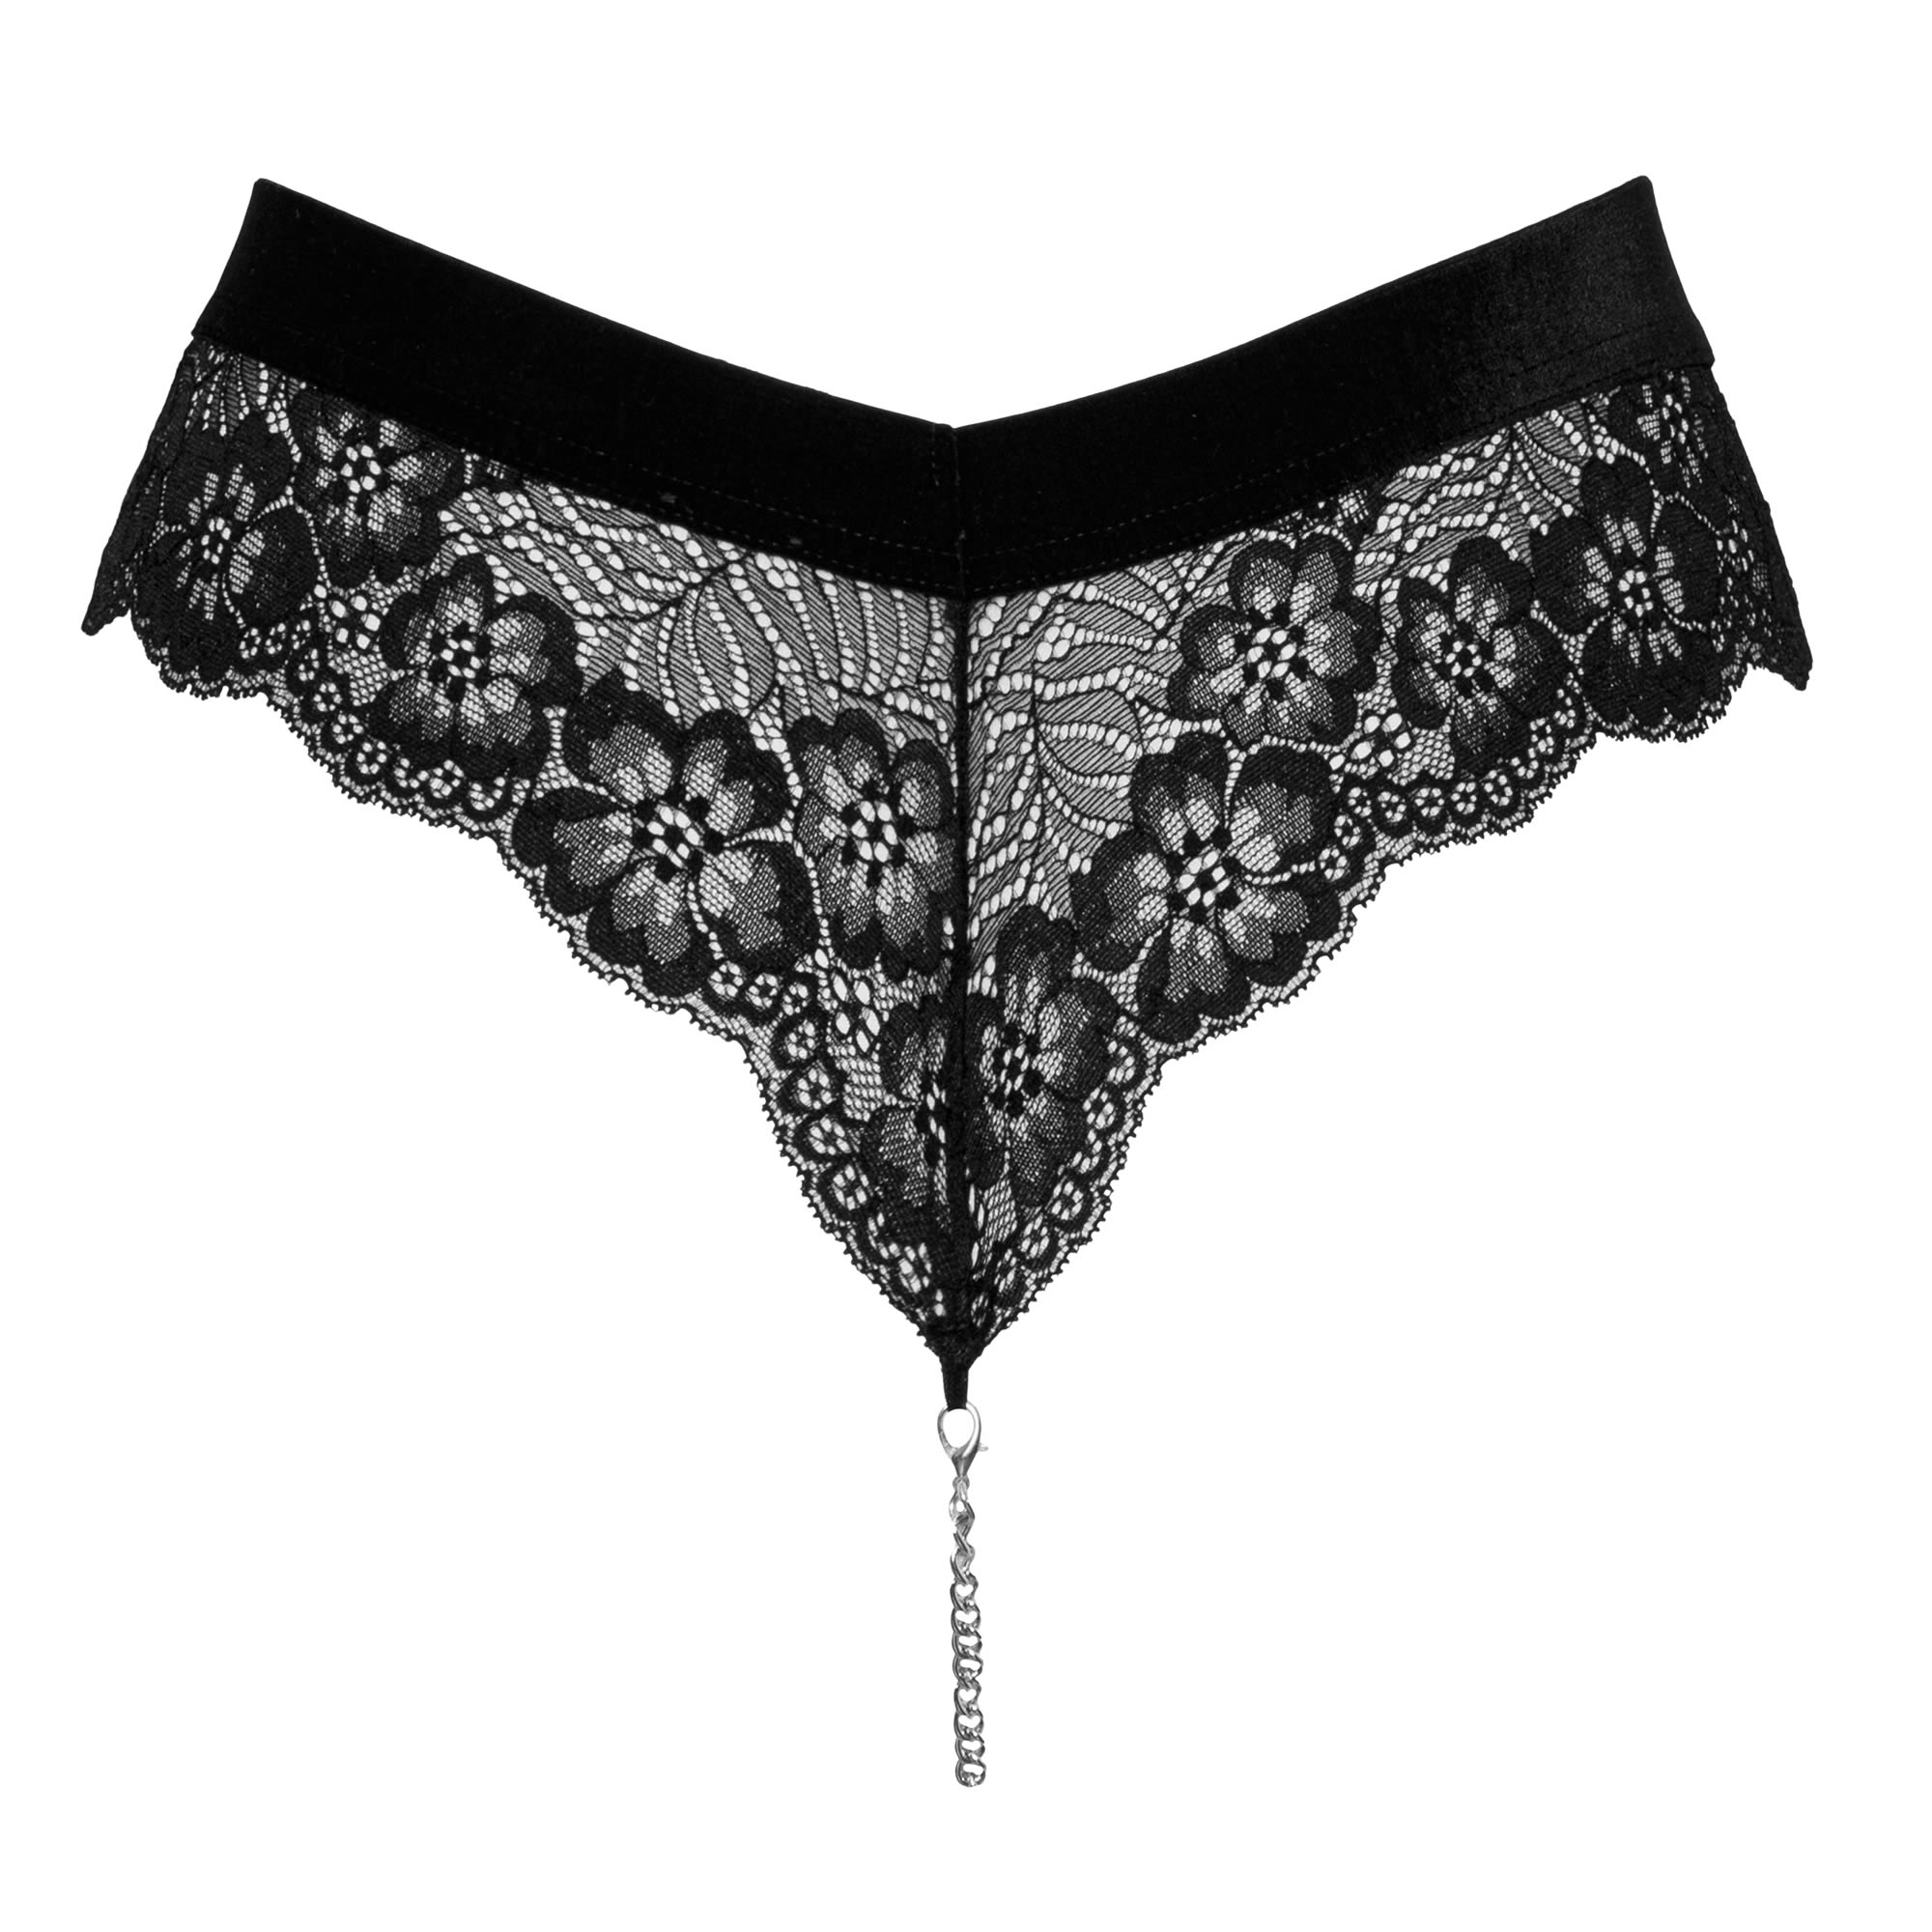 Lace Panties with Velvet and a Stimulating Chain